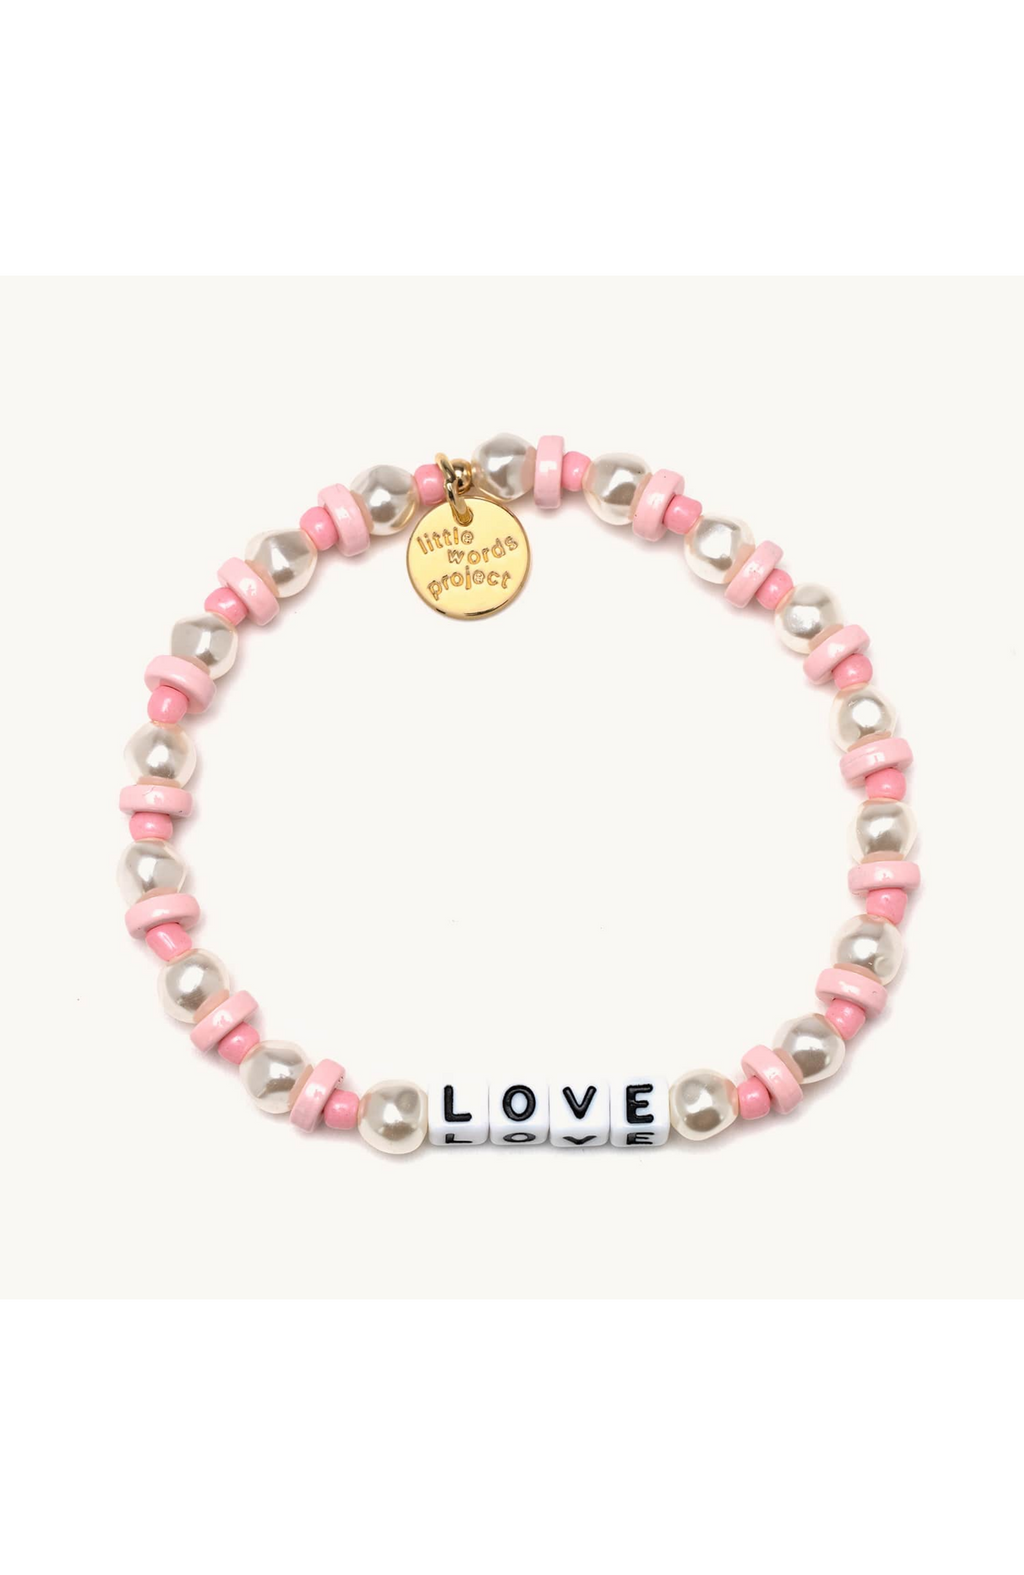 Little Words Project - Love Pink Pearl